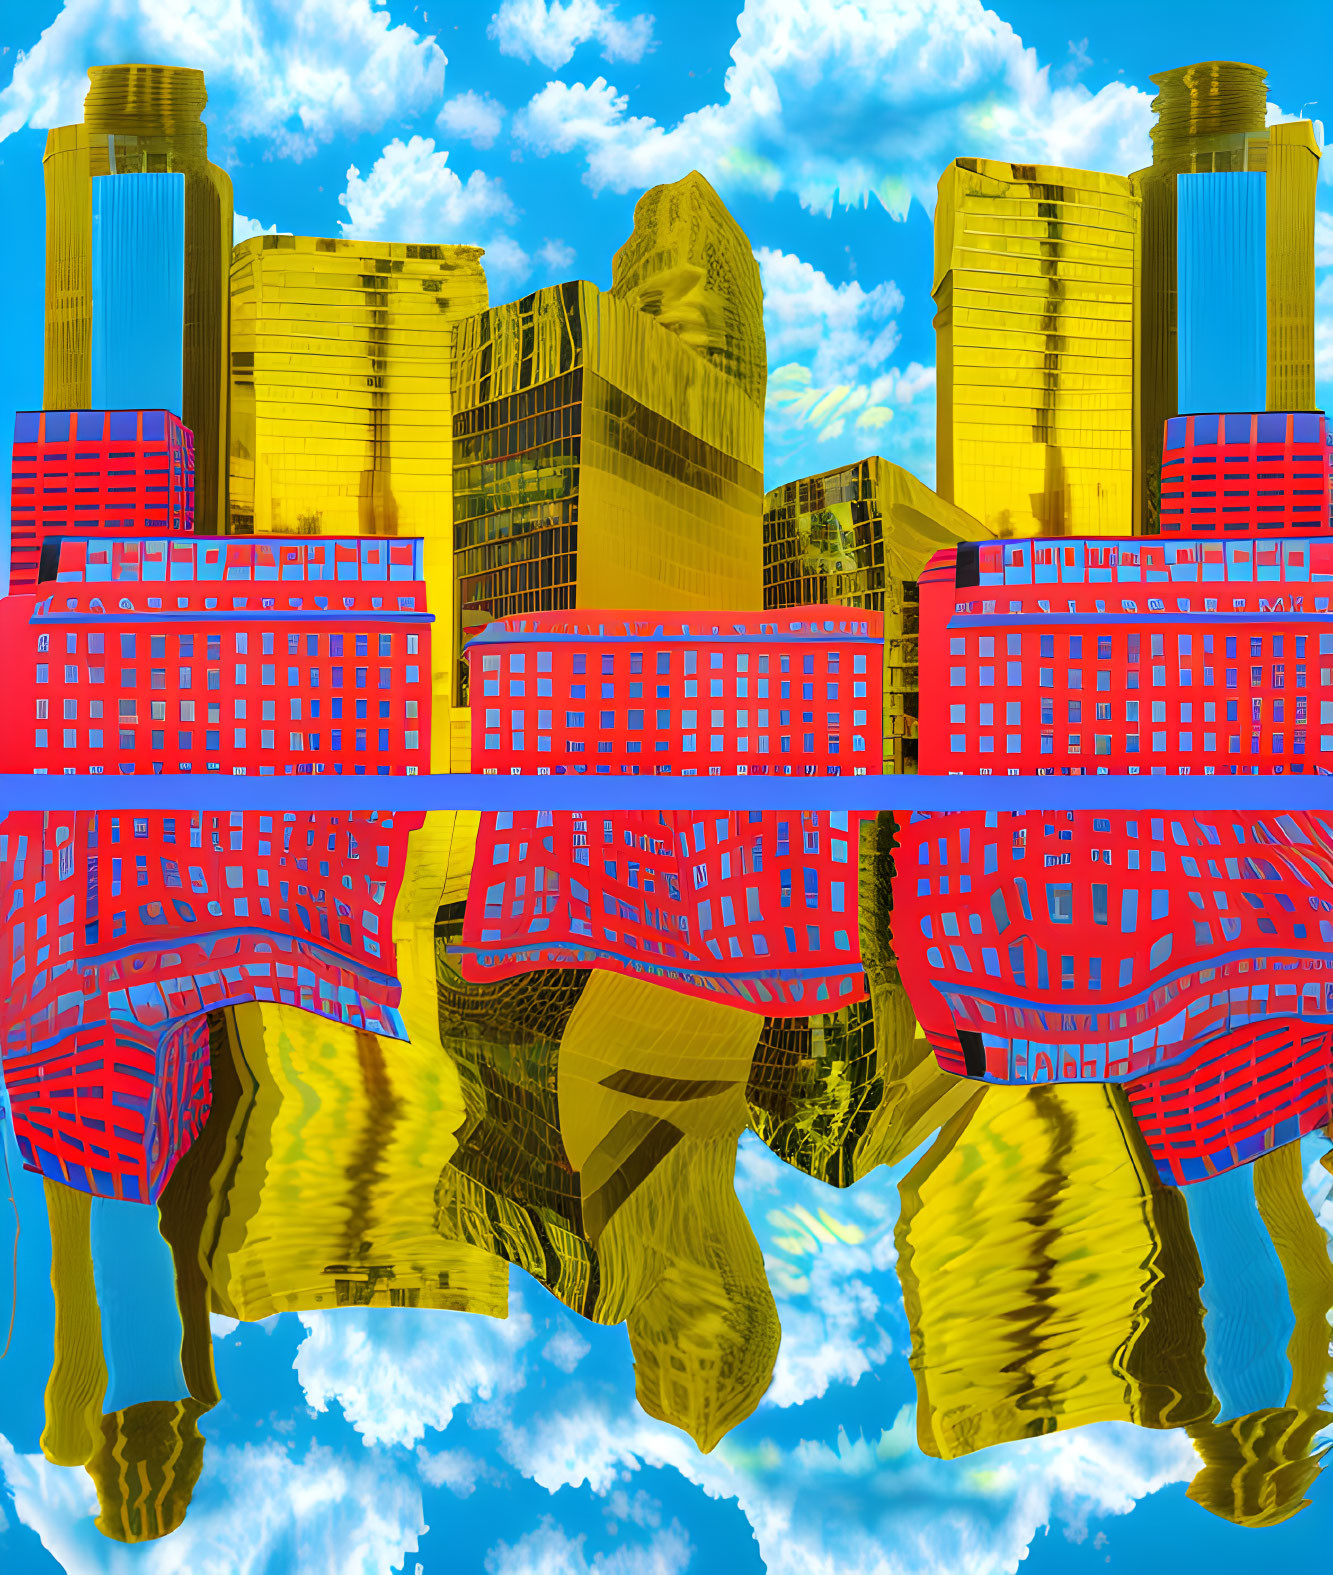 Mirrored Abstract Image: Vibrant Yellow and Red Buildings Reflecting in Blue Sky